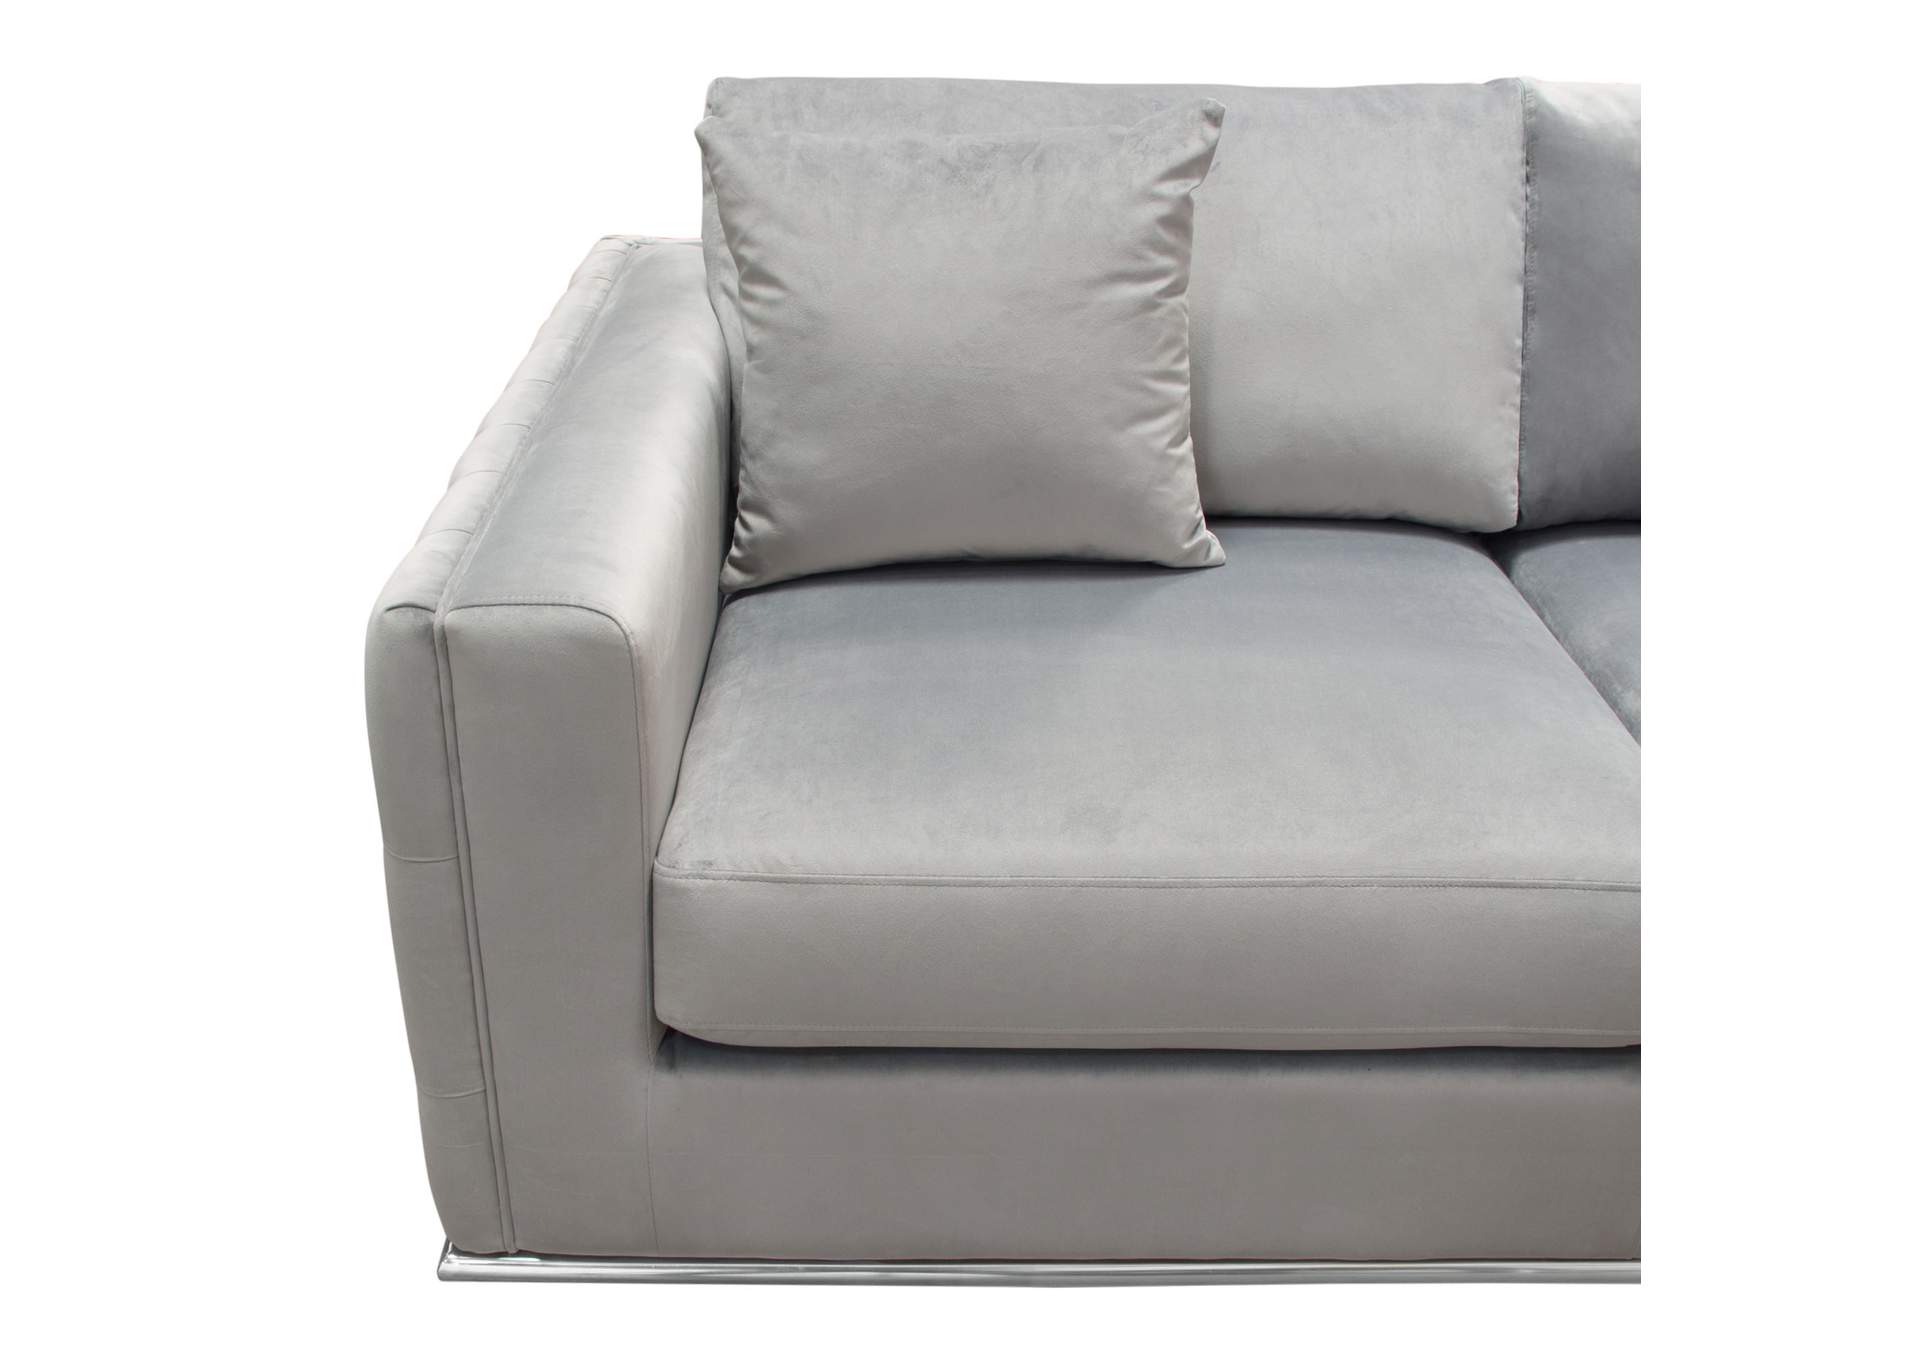 Envy Loveseat in Platinum Grey Velvet with Tufted Outside Detail and Silver Metal Trim by Diamond Sofa,Diamond Sofa